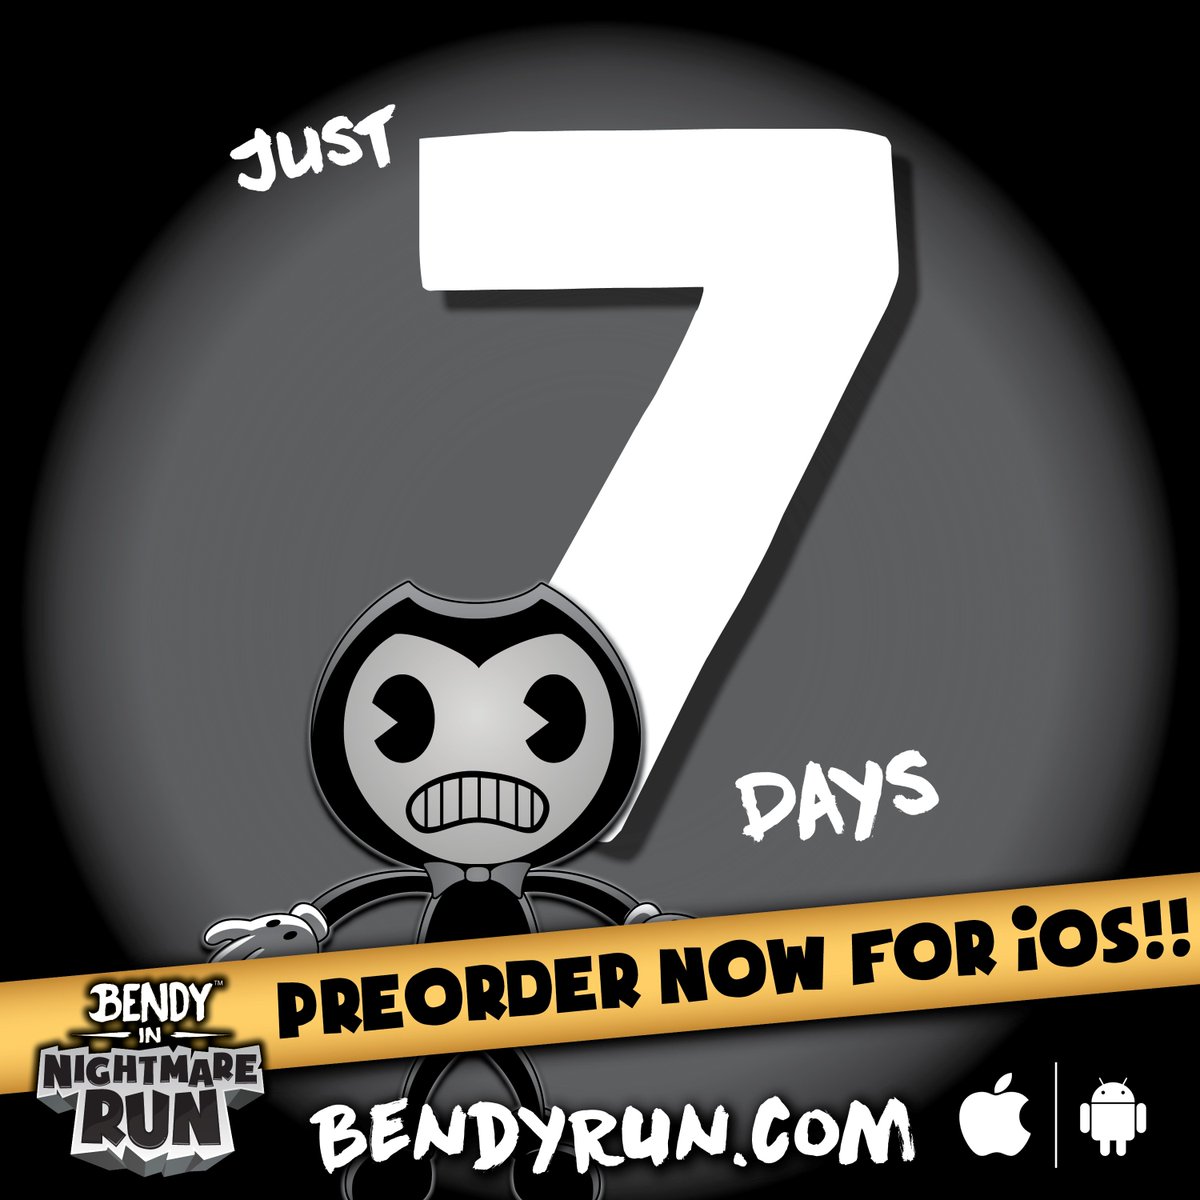 Bendy Run on Twitter "One week to go! Some of the nasty beasts of 